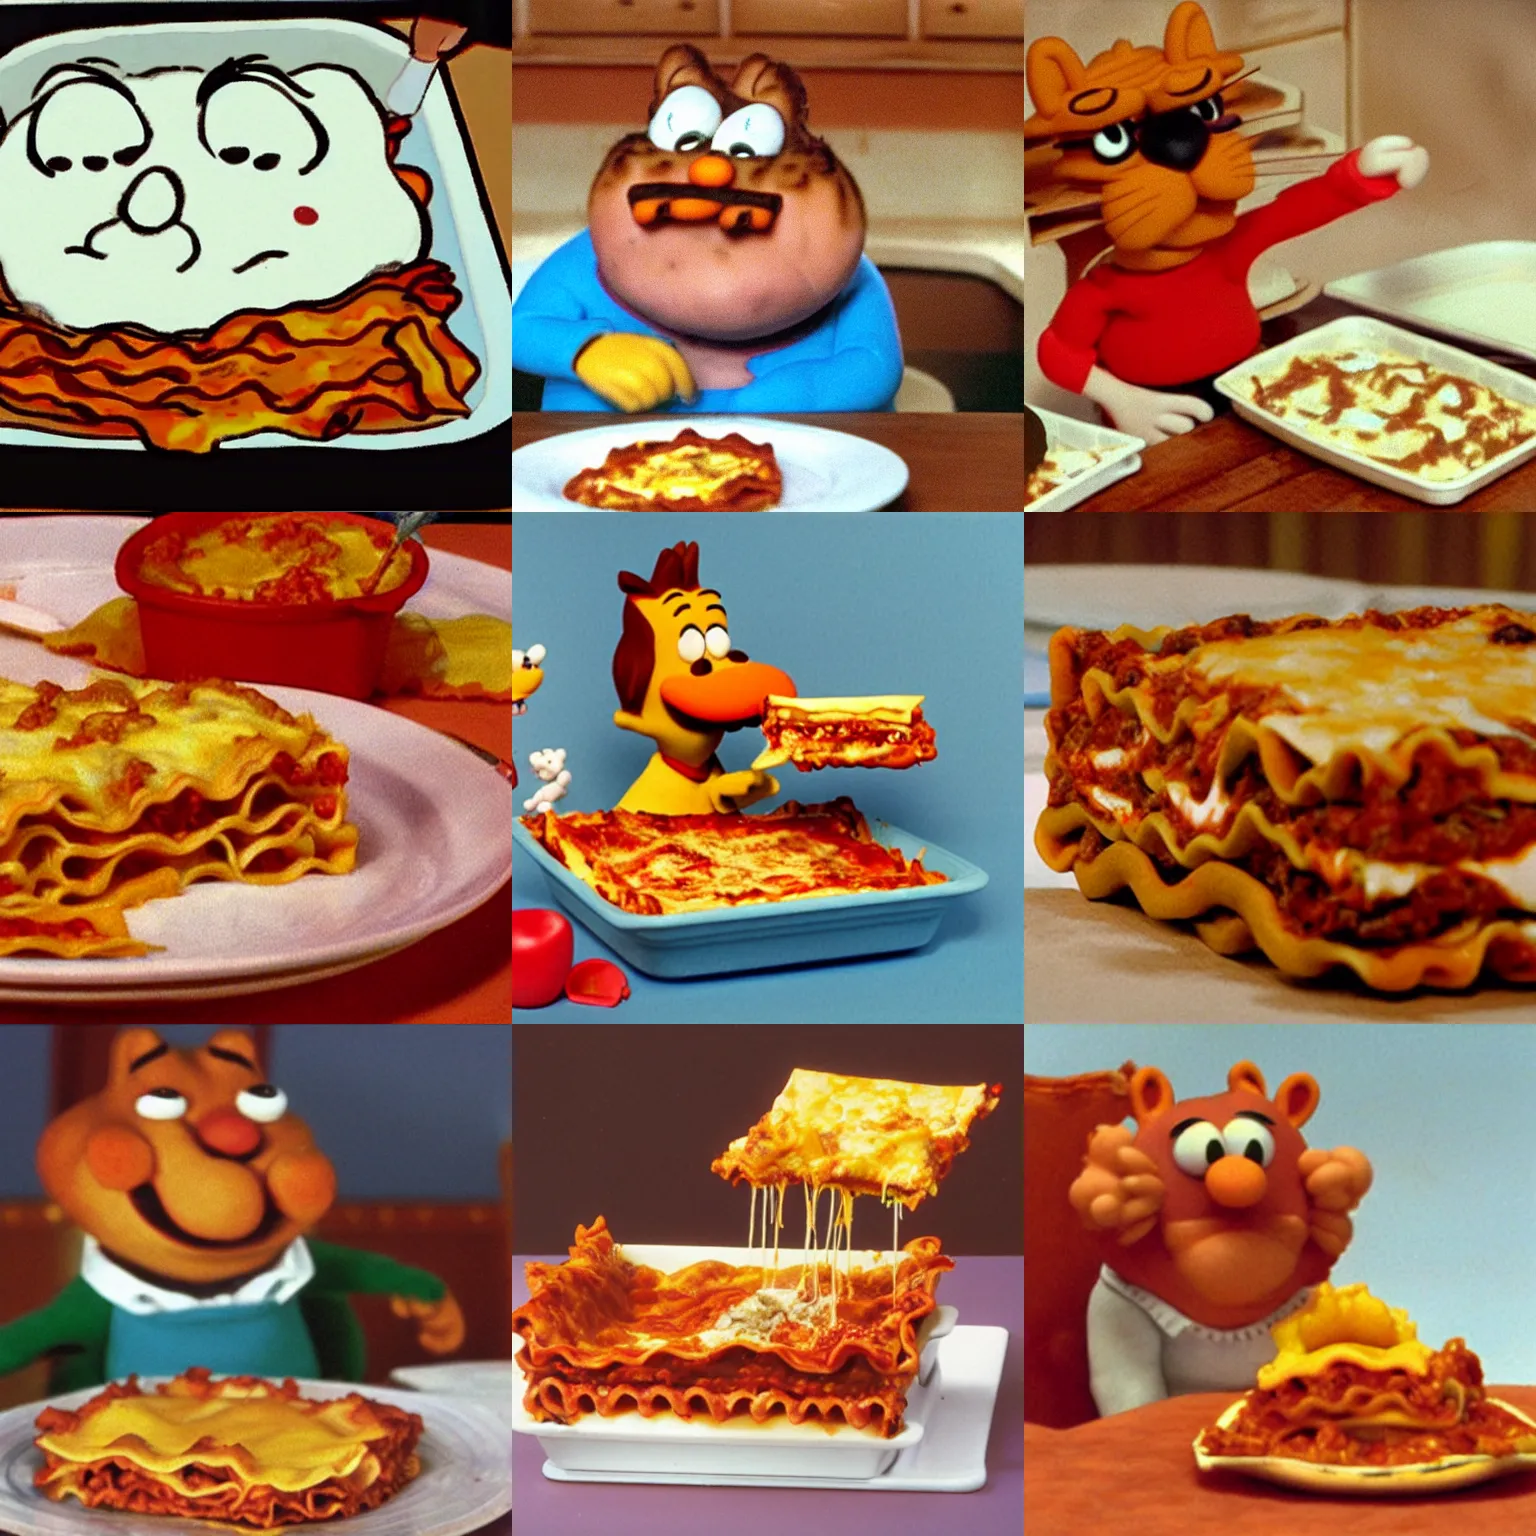 Prompt: Garfield eating lasagna, still from a claymation